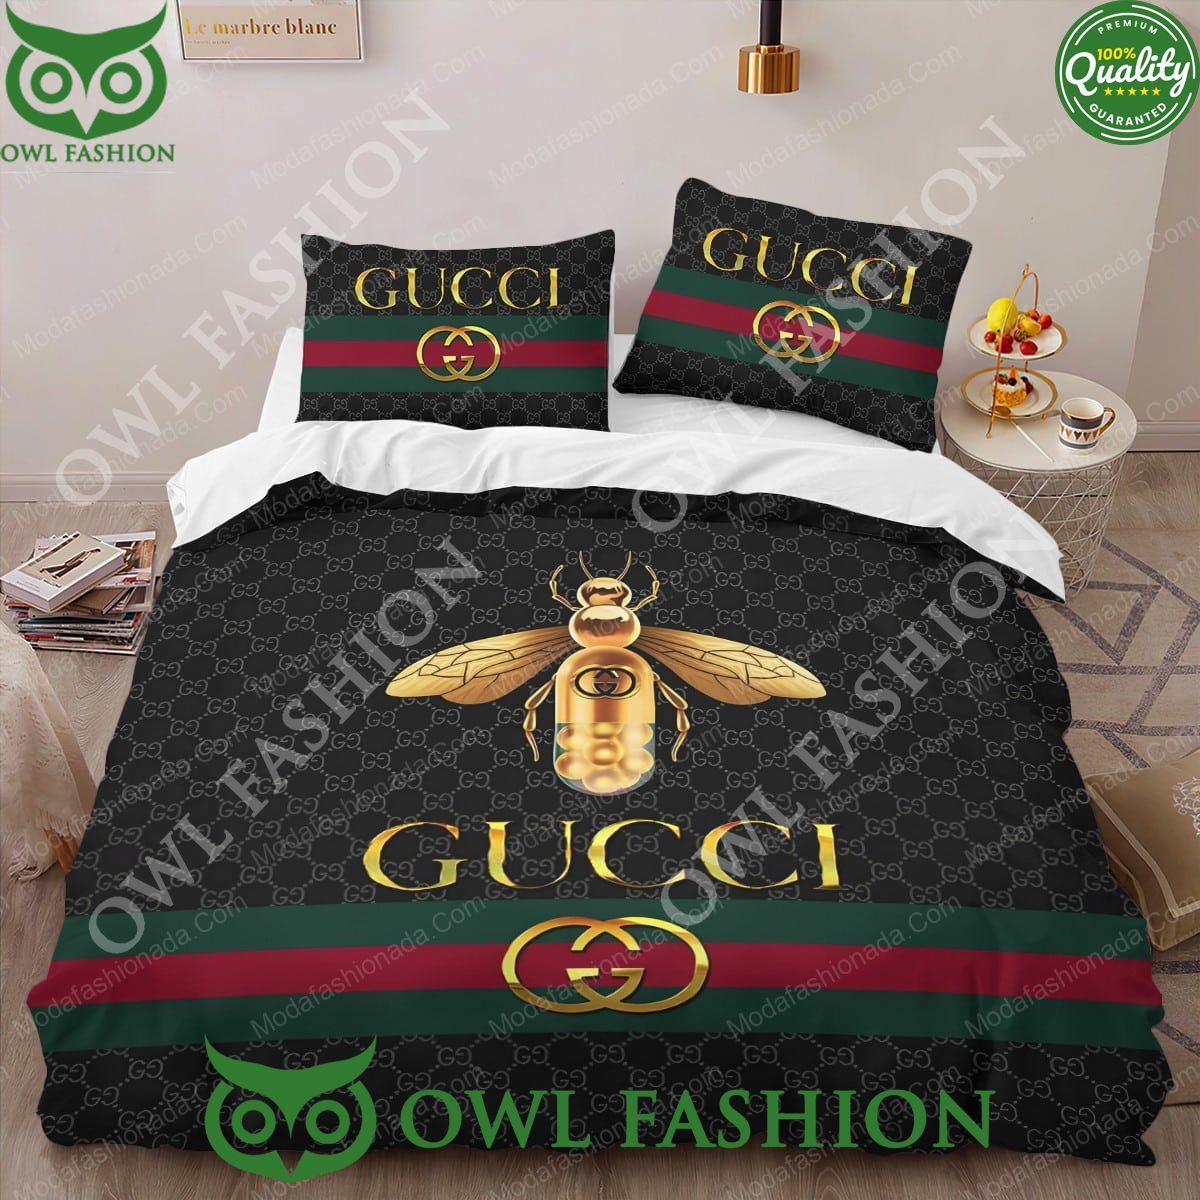 Gucci Bee Bedding Sets The design is both elegant and approachable.